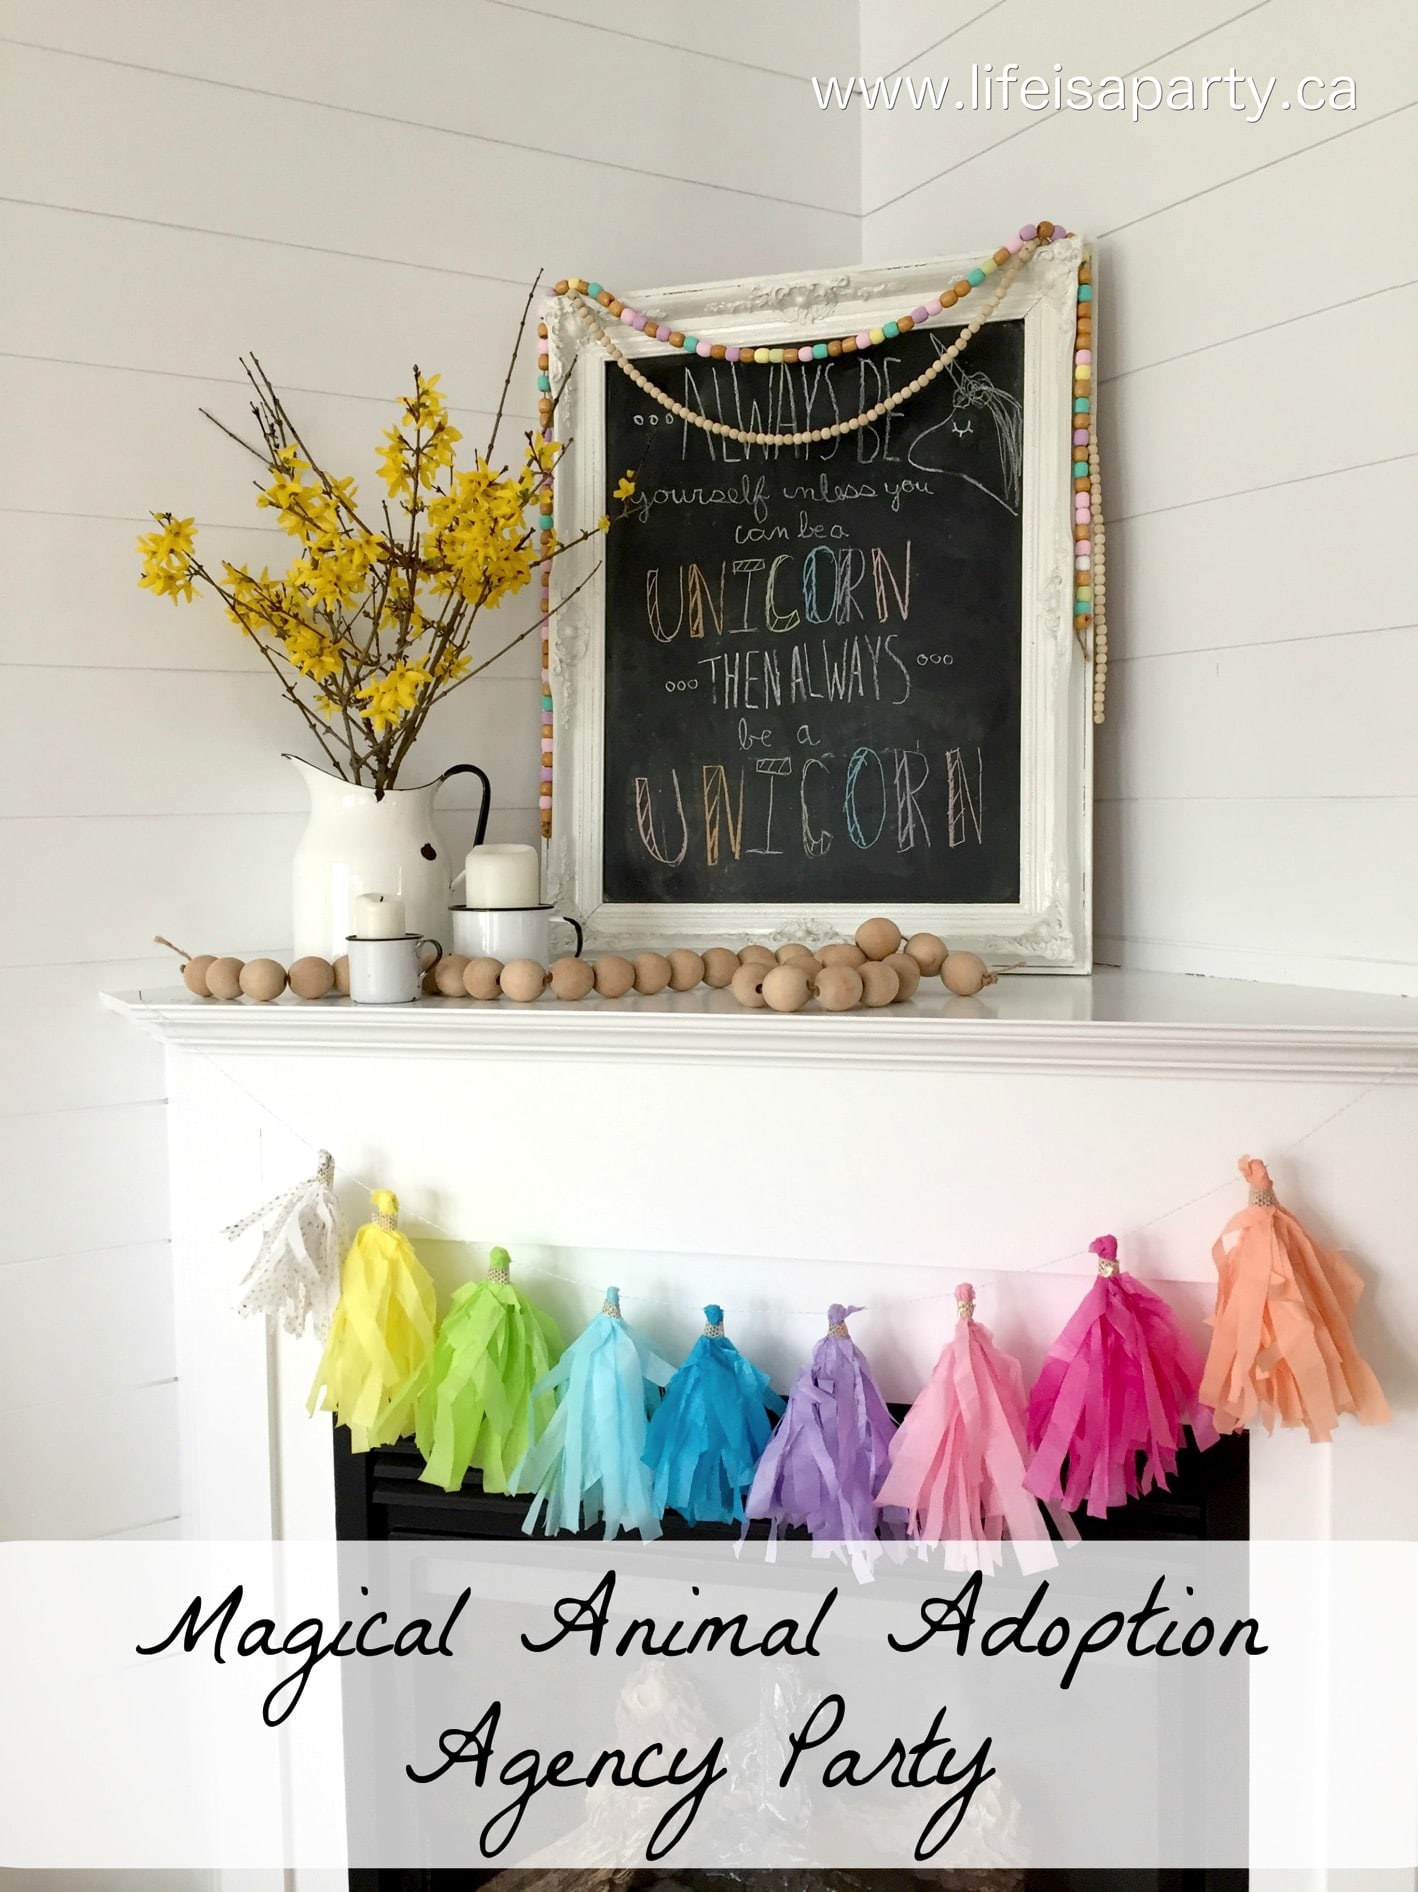 Magical Animal Adoption Agency Birthday Party: create your own agency with stuffed animals and activities for the perfect birthday party.